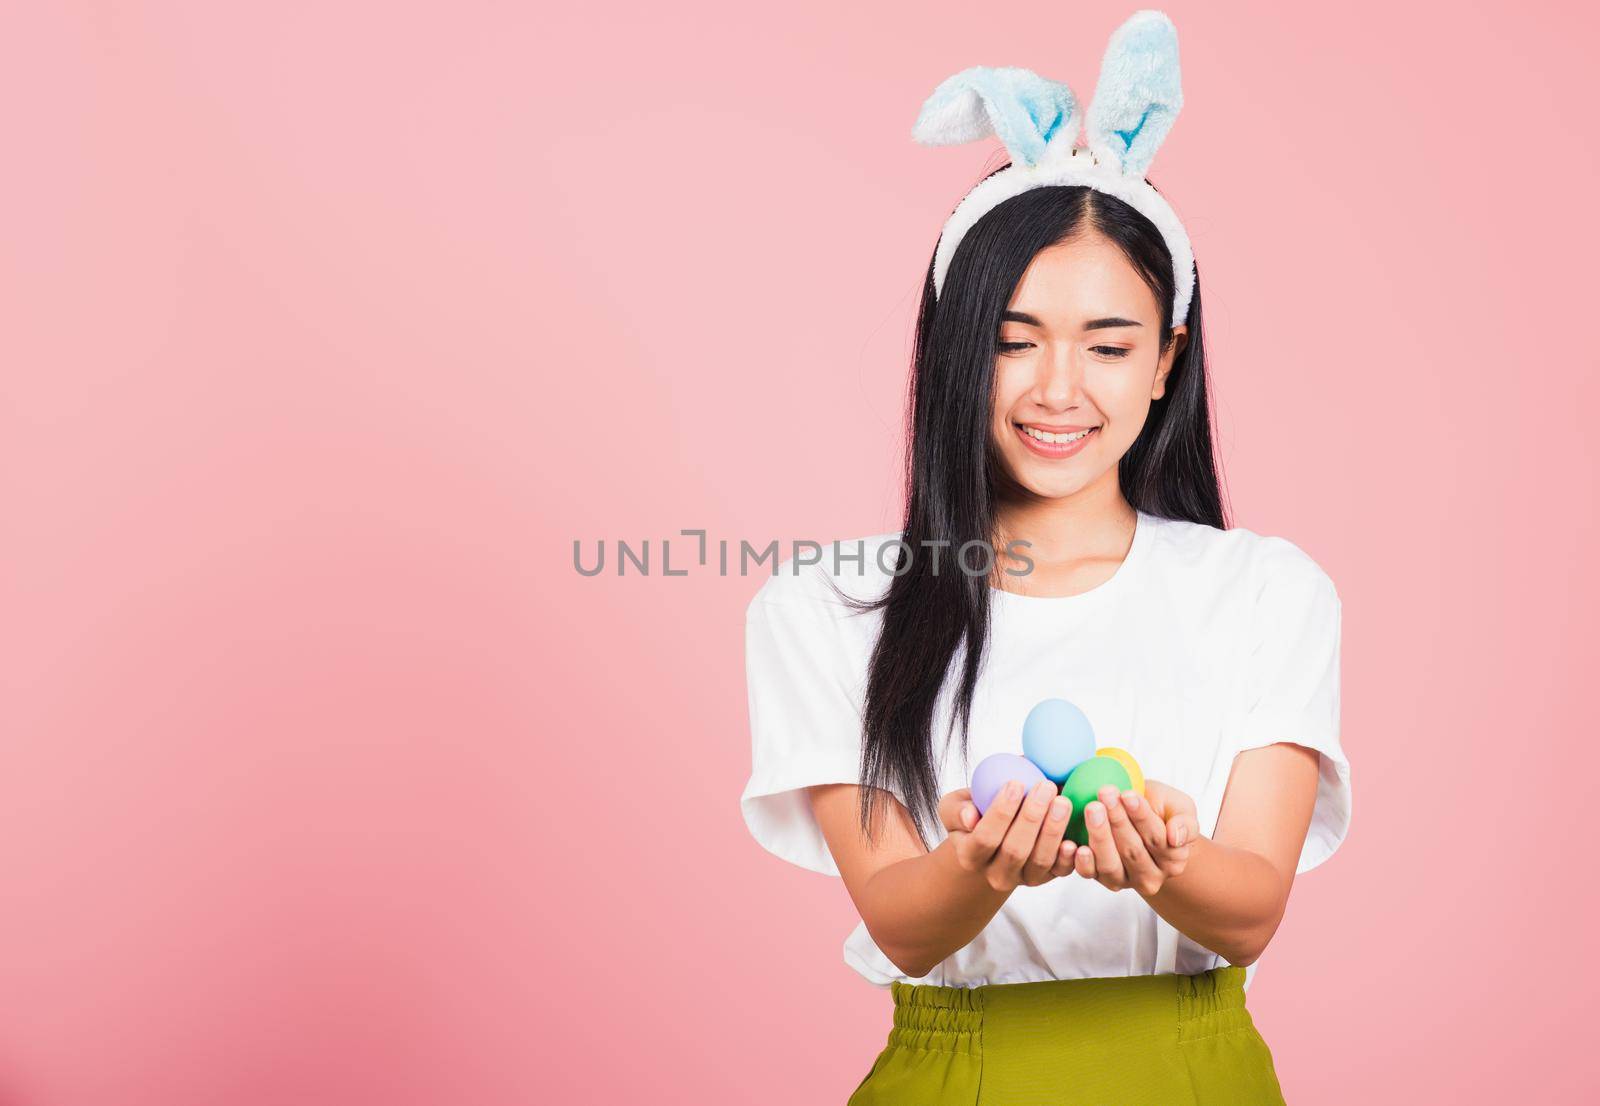 Happy Easter concept. Beautiful young woman smiling wearing rabbit ears holding colorful Easter eggs gift on hands, Portrait female looking at eggs, studio shot isolated on pink background